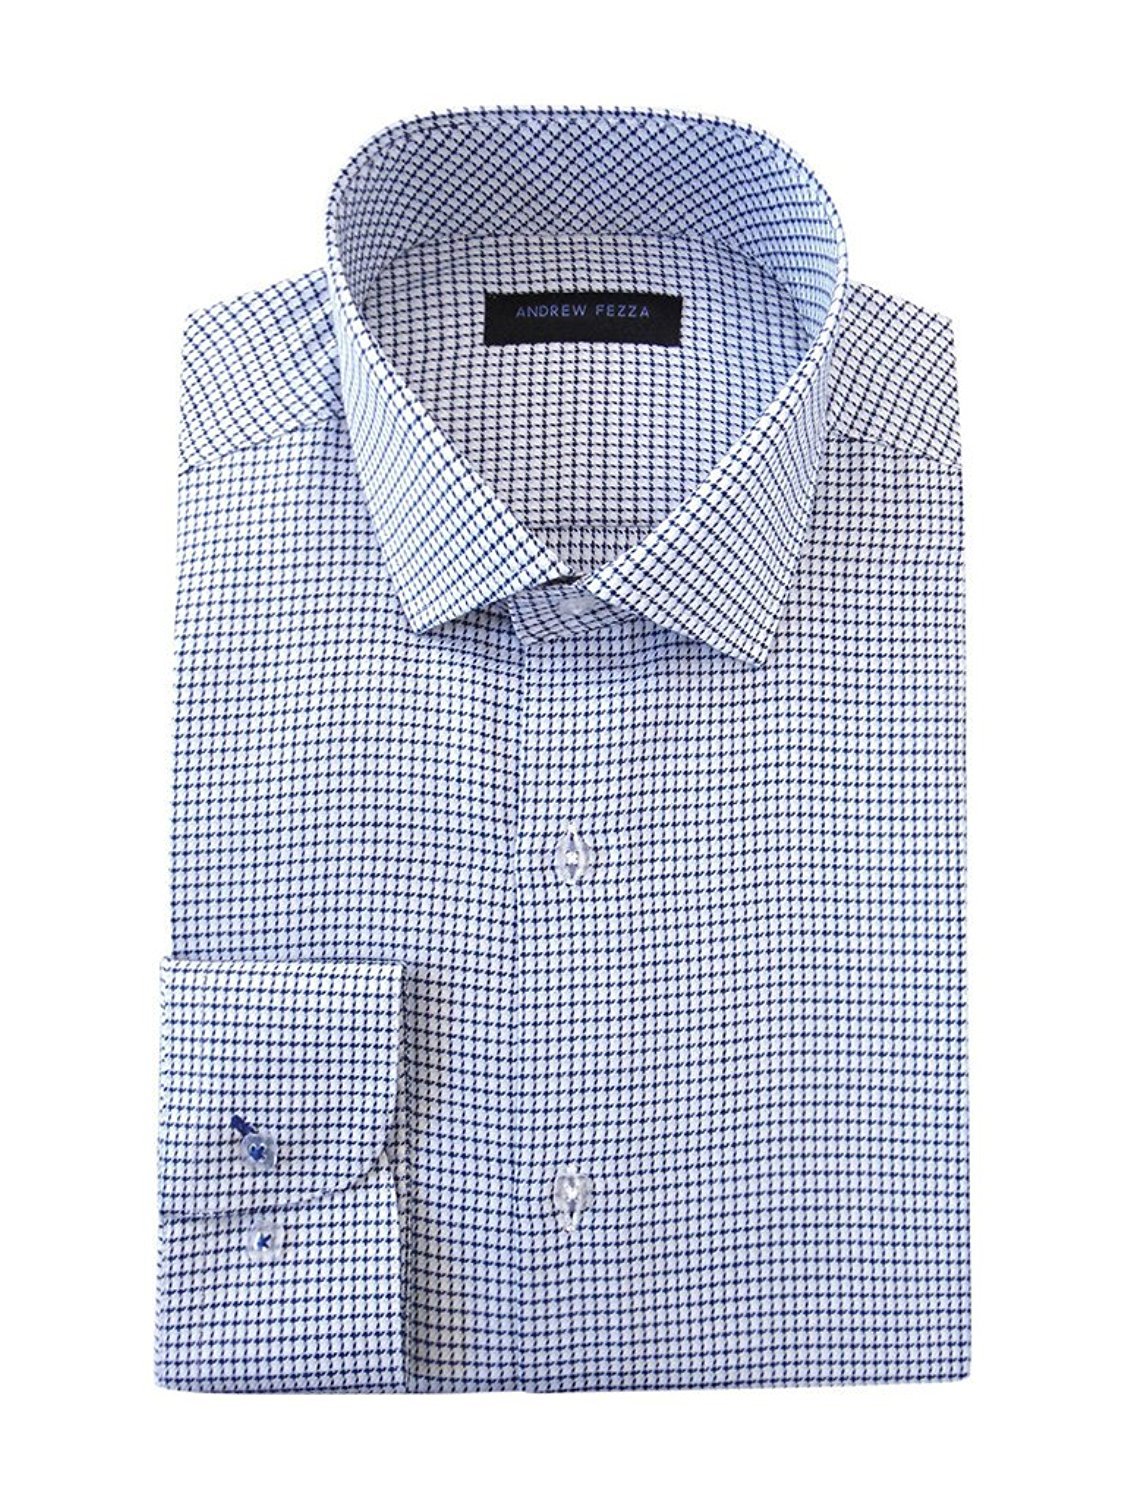 Andrew Fezza Men's Slim Fit Dress Shirt - Available in Many Patterns ...